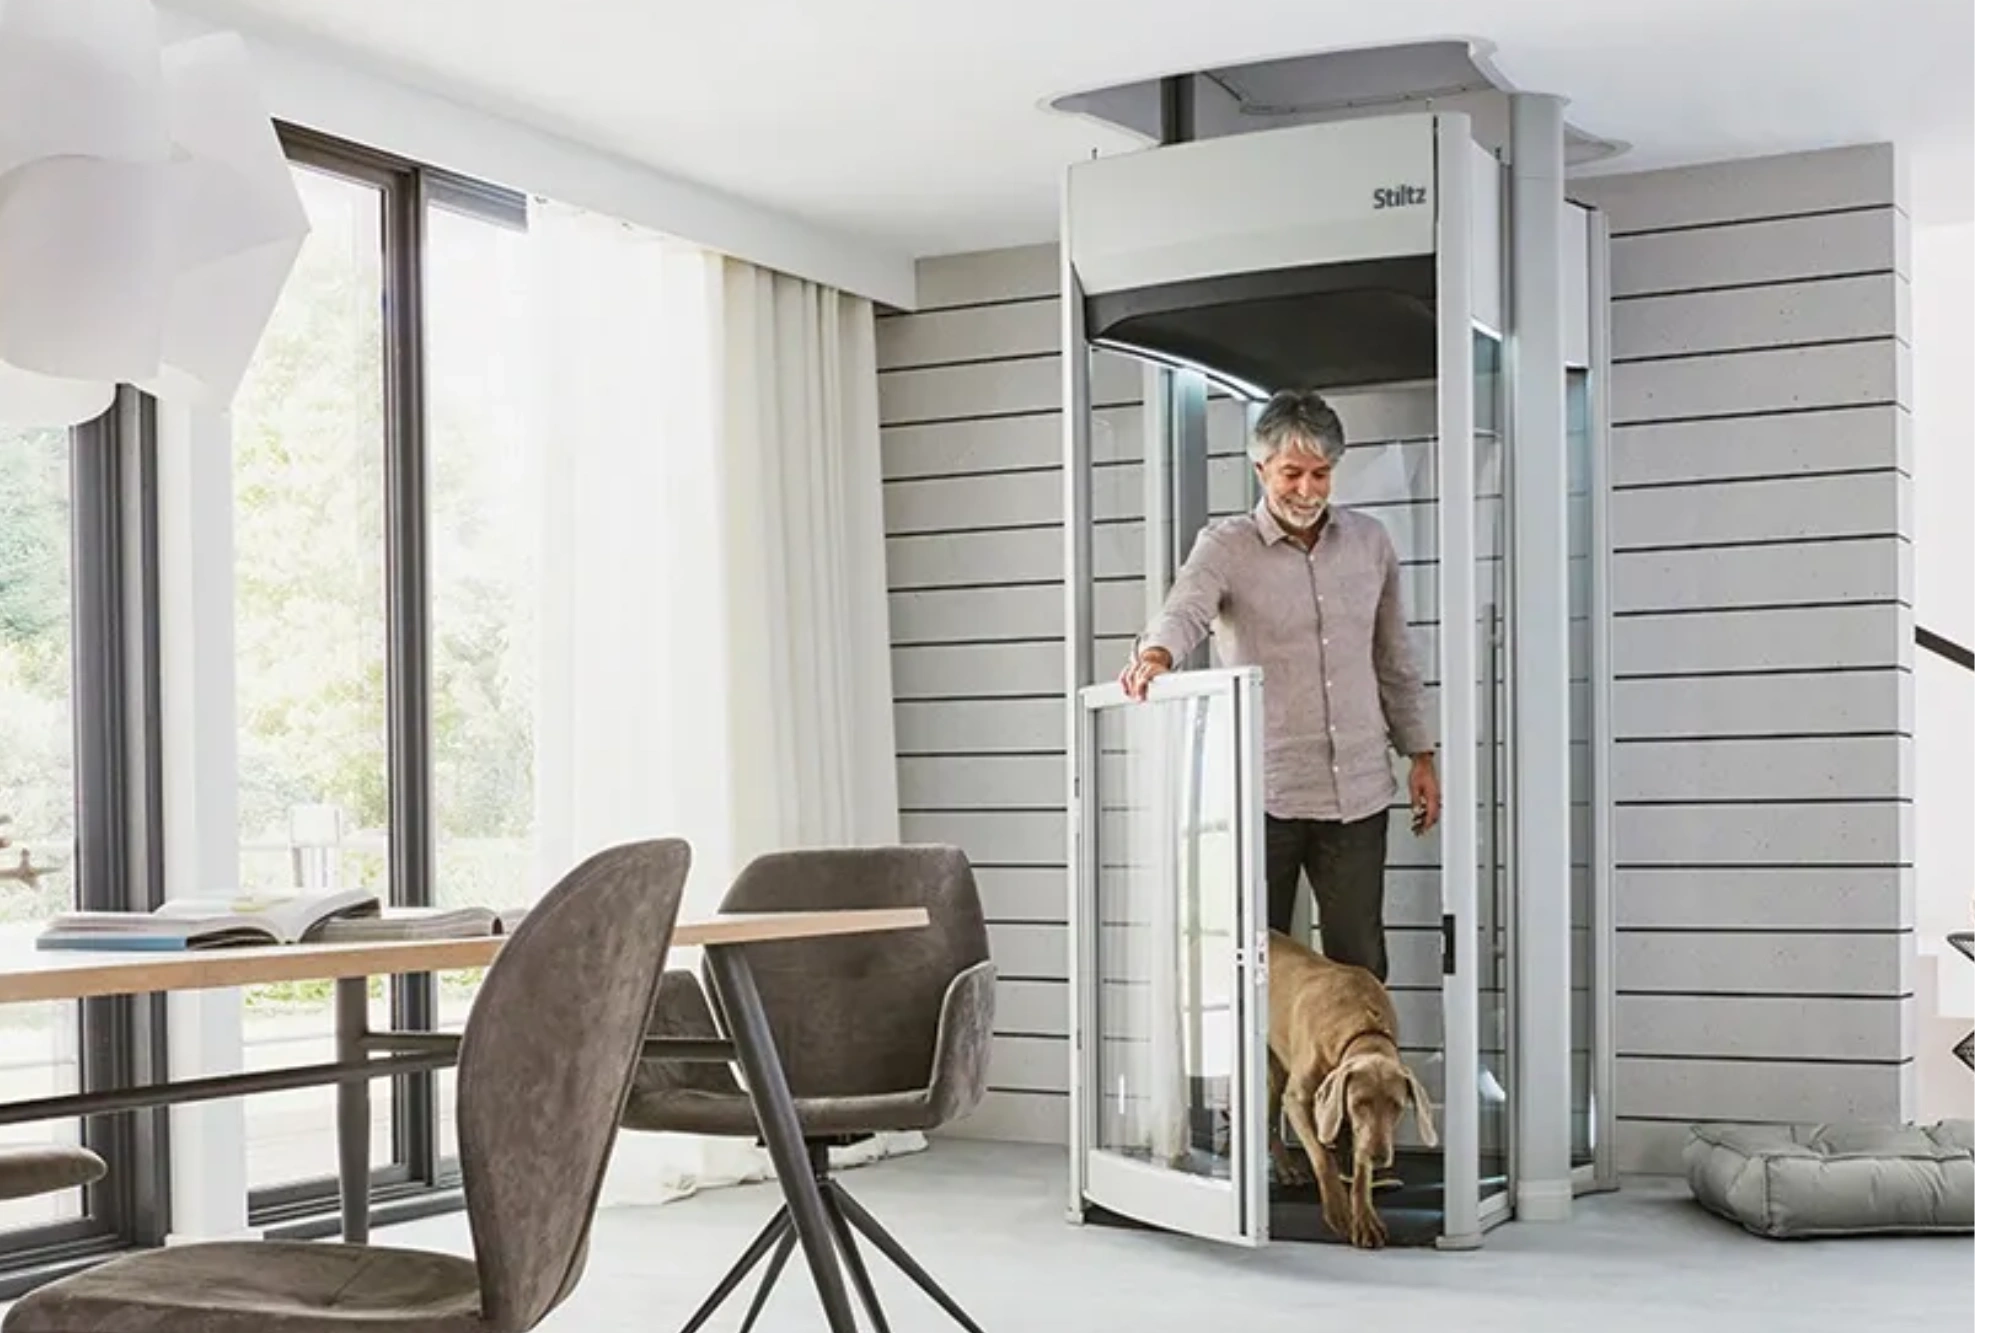 Affordable Wheelchair Lifts  House lift, Elevator design, Wheelchair  elevator